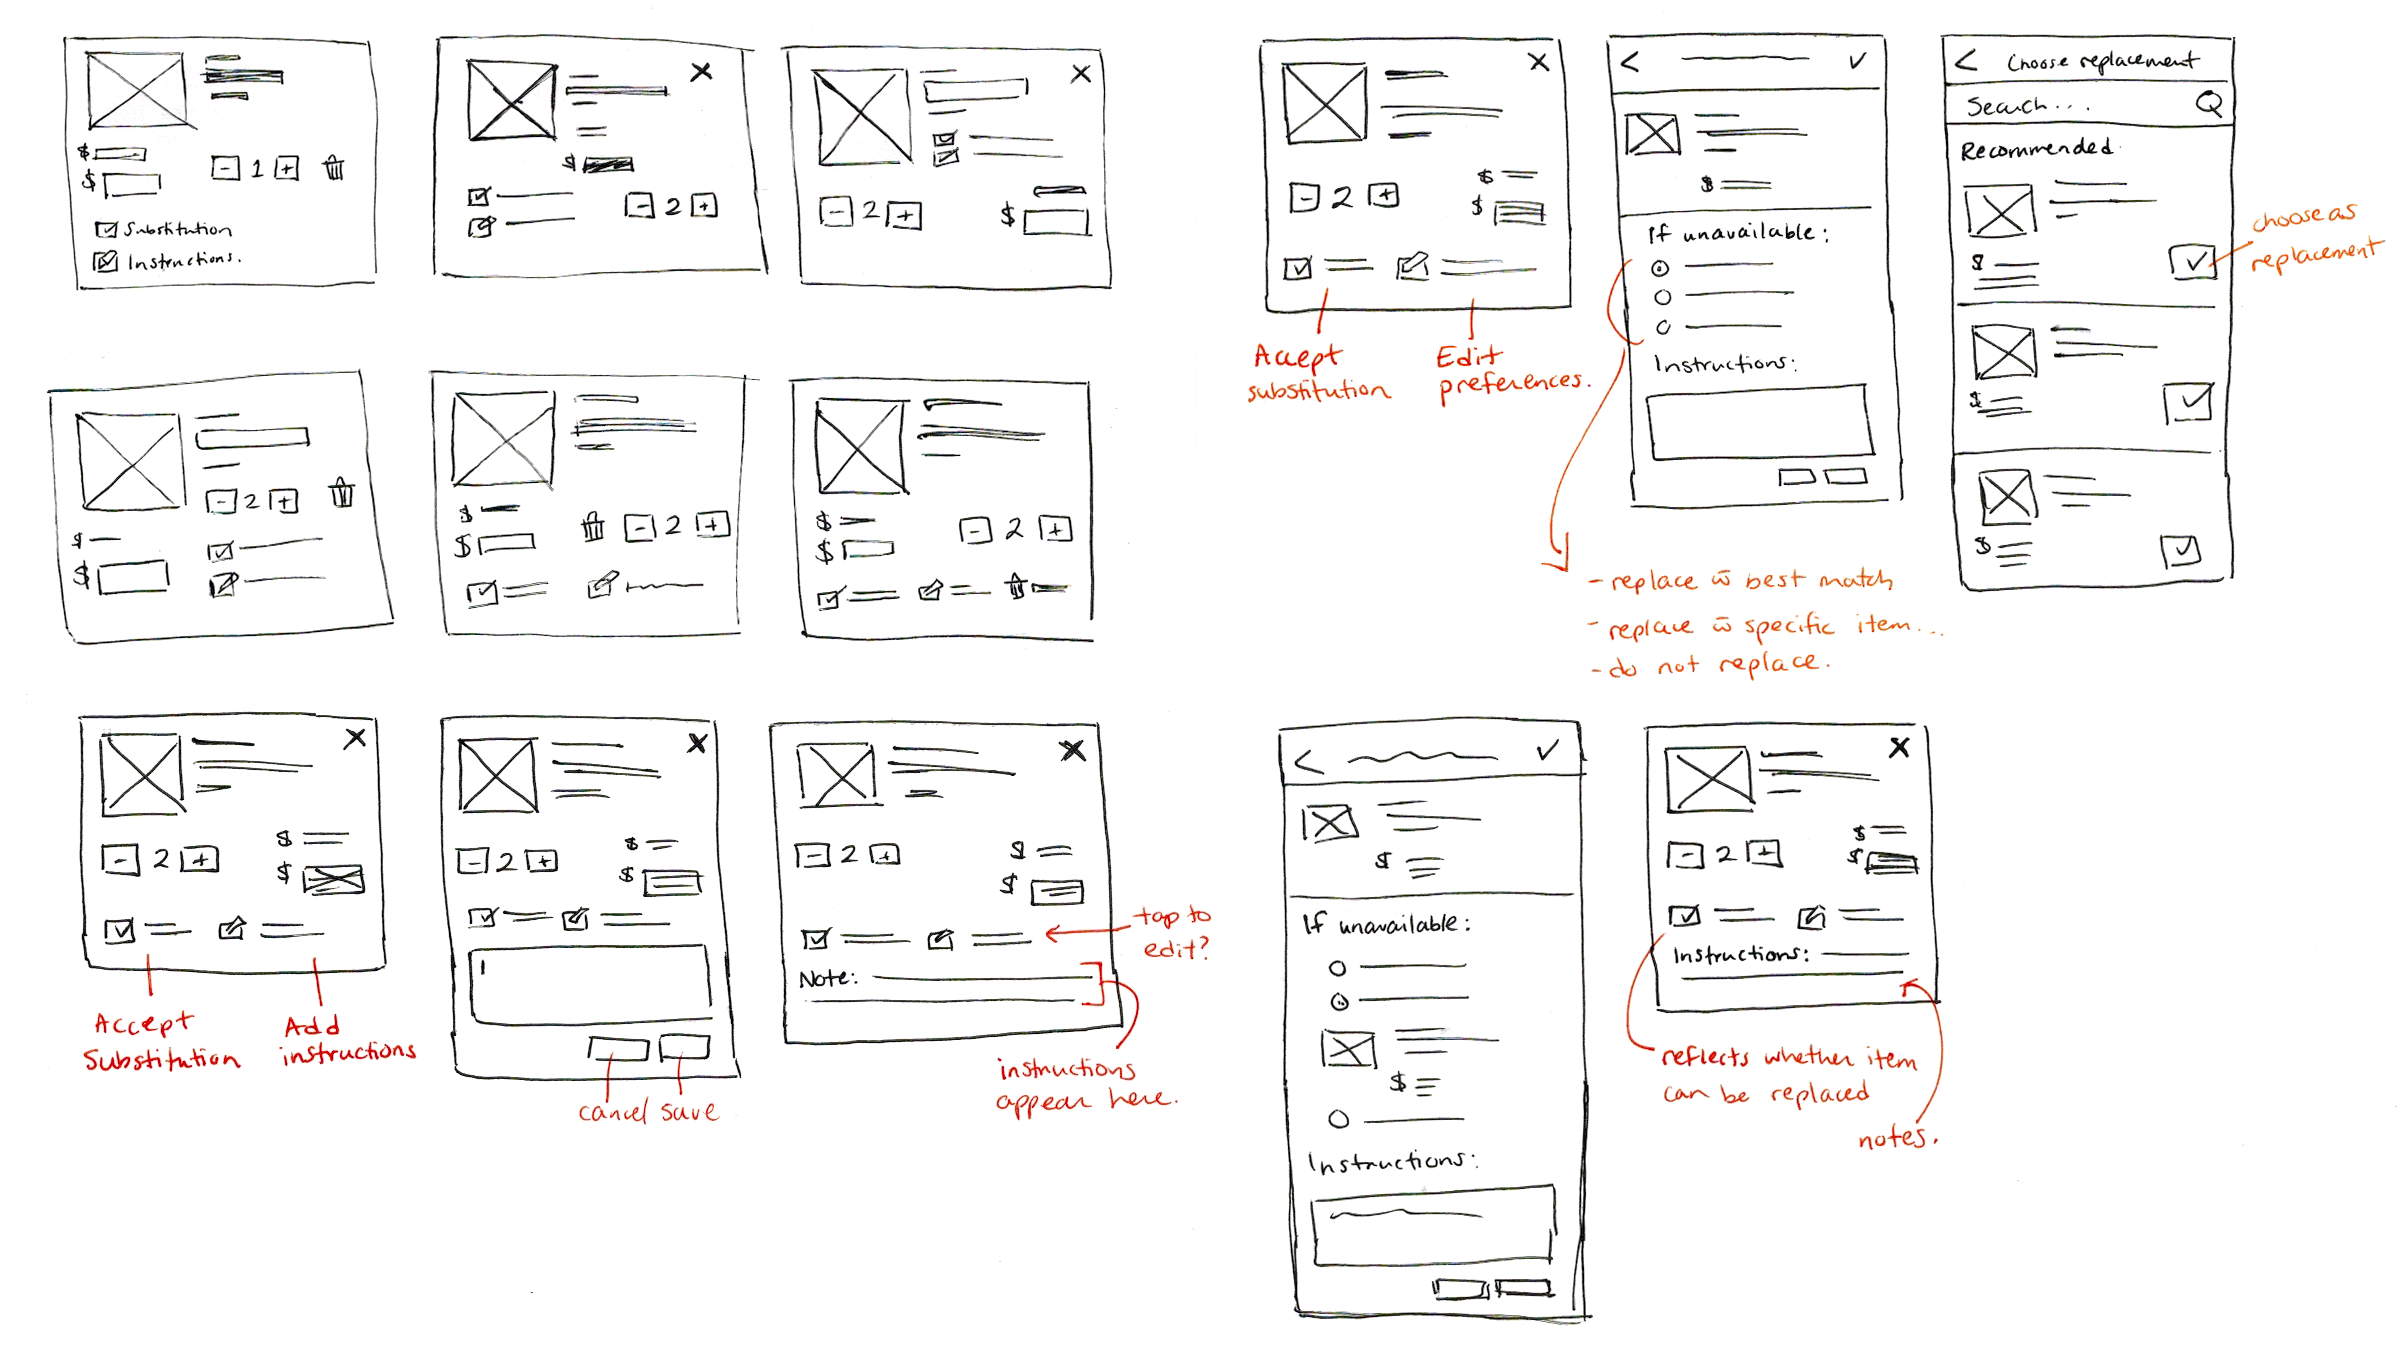 Hand-drawn sketches of wireframes for product cards with annotations in red